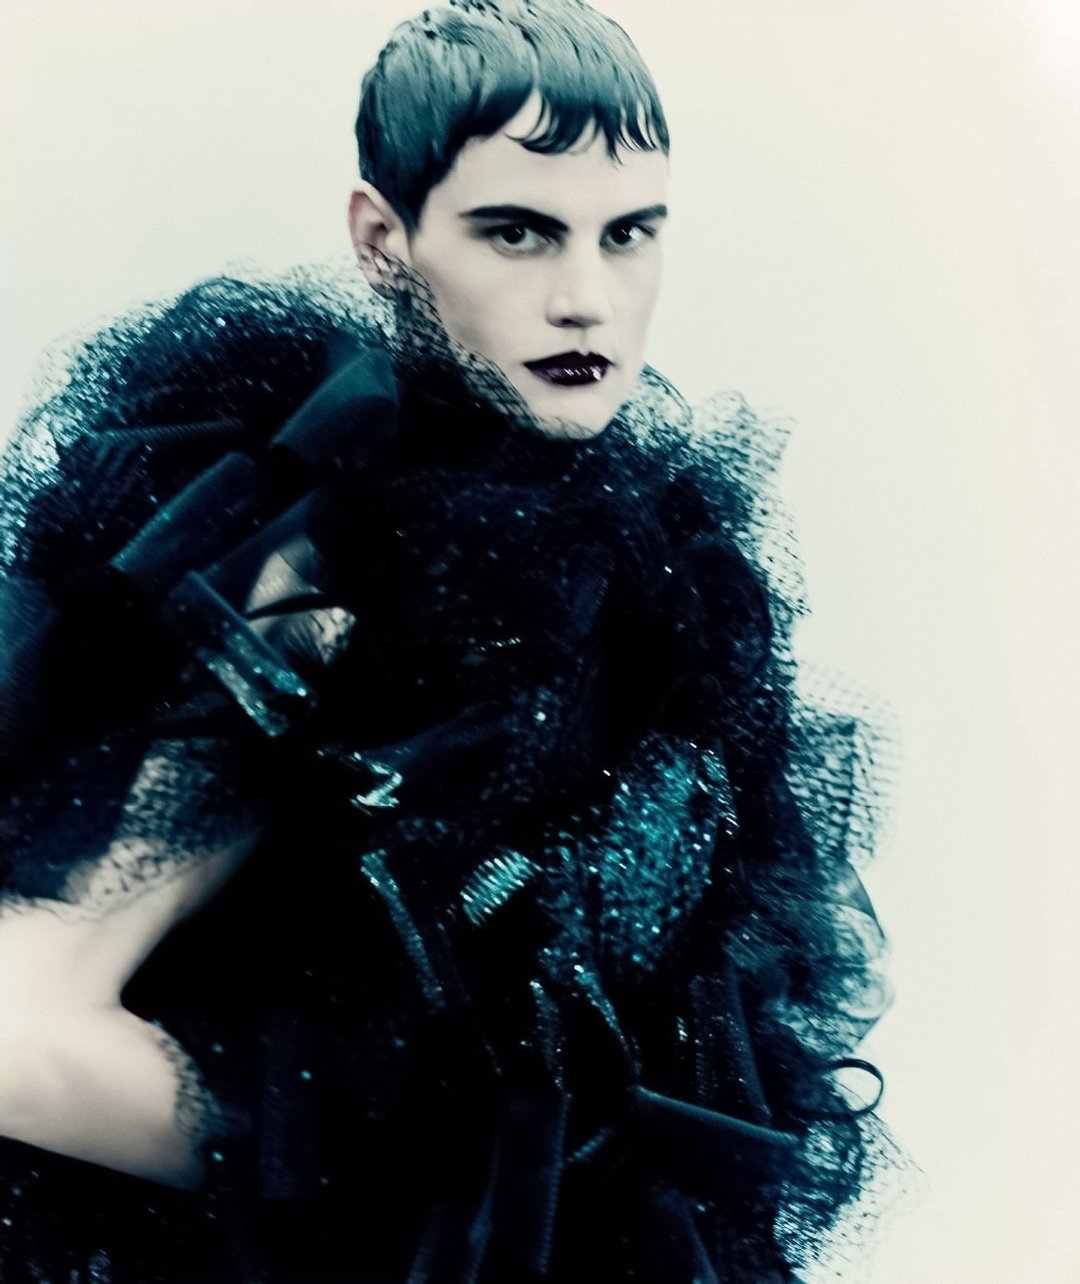 Paolo-Roversi-fall-couture-in-d-Magazine00009.jpeg